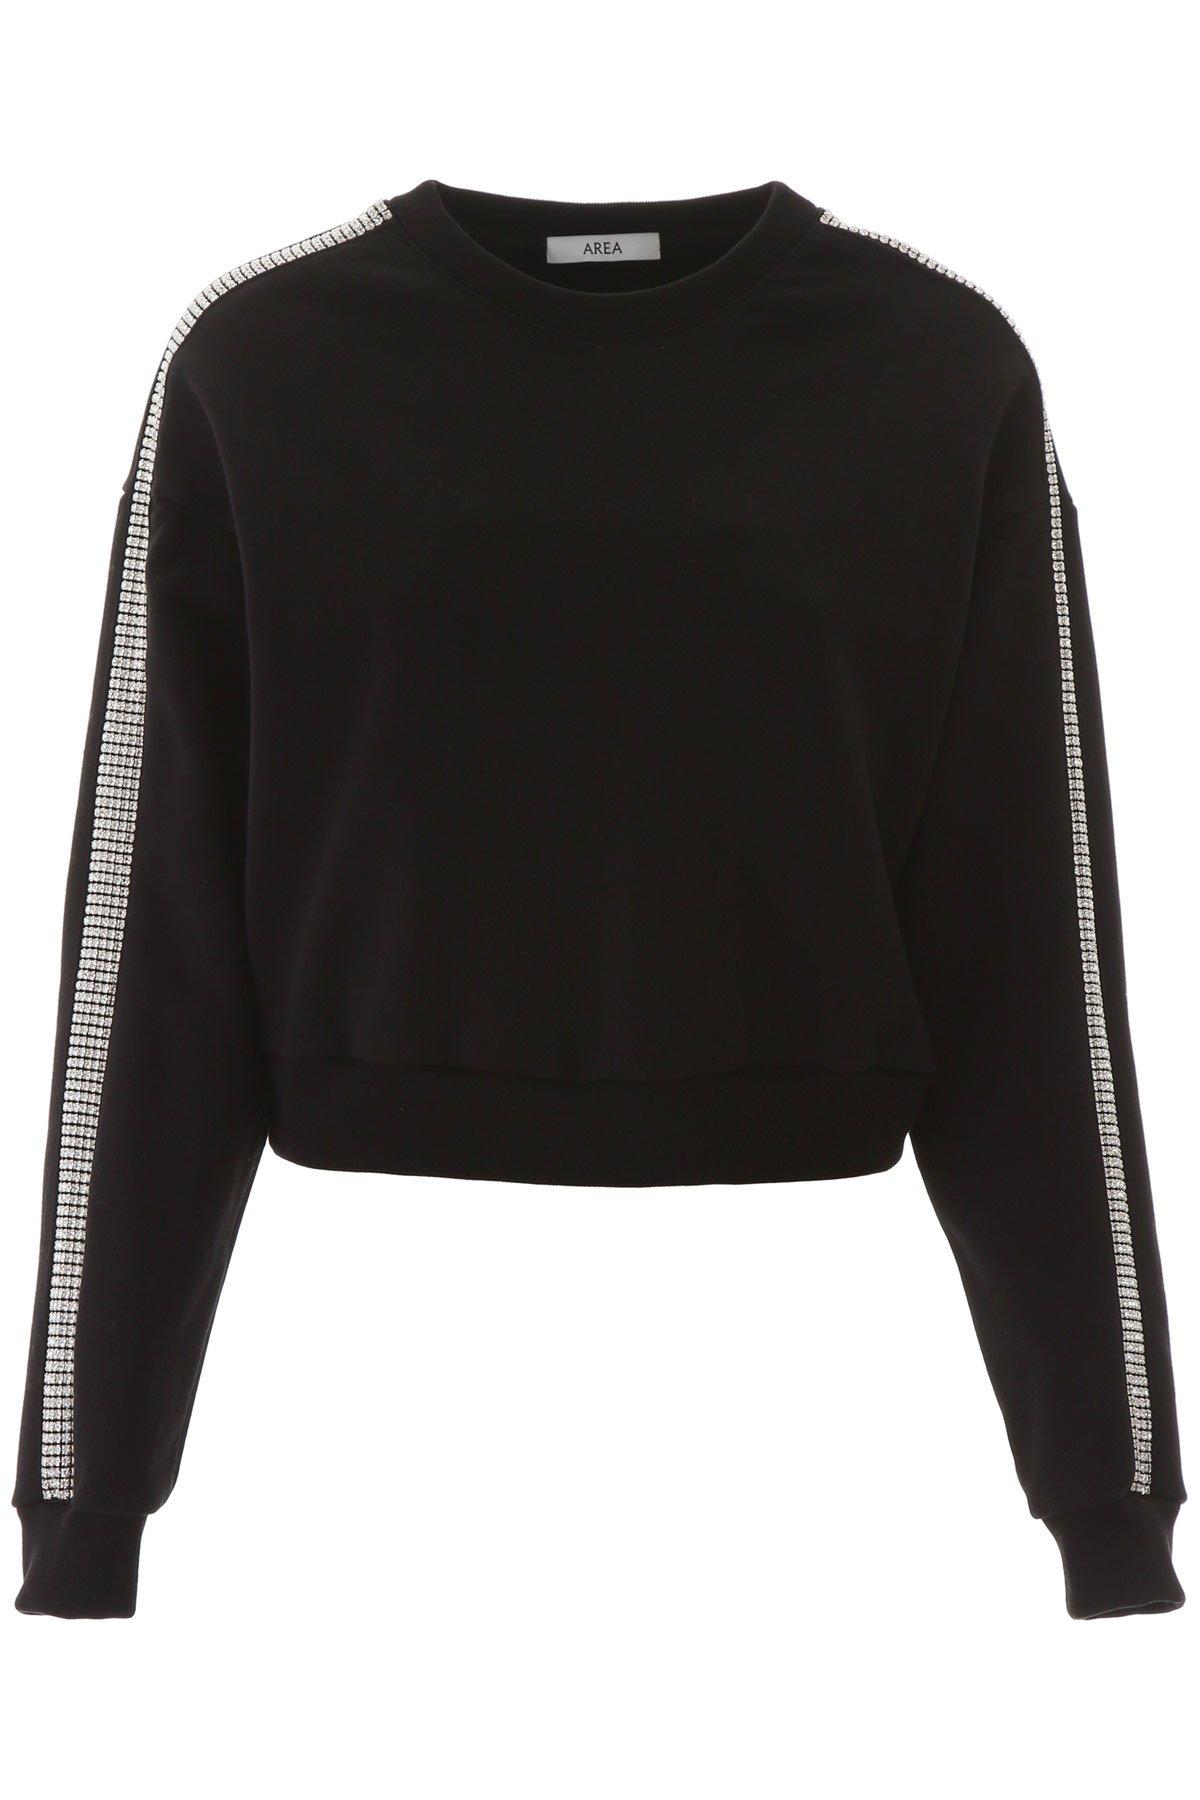 Area Cotton Crystal Embellished Cropped Sweatshirt in Black - Lyst